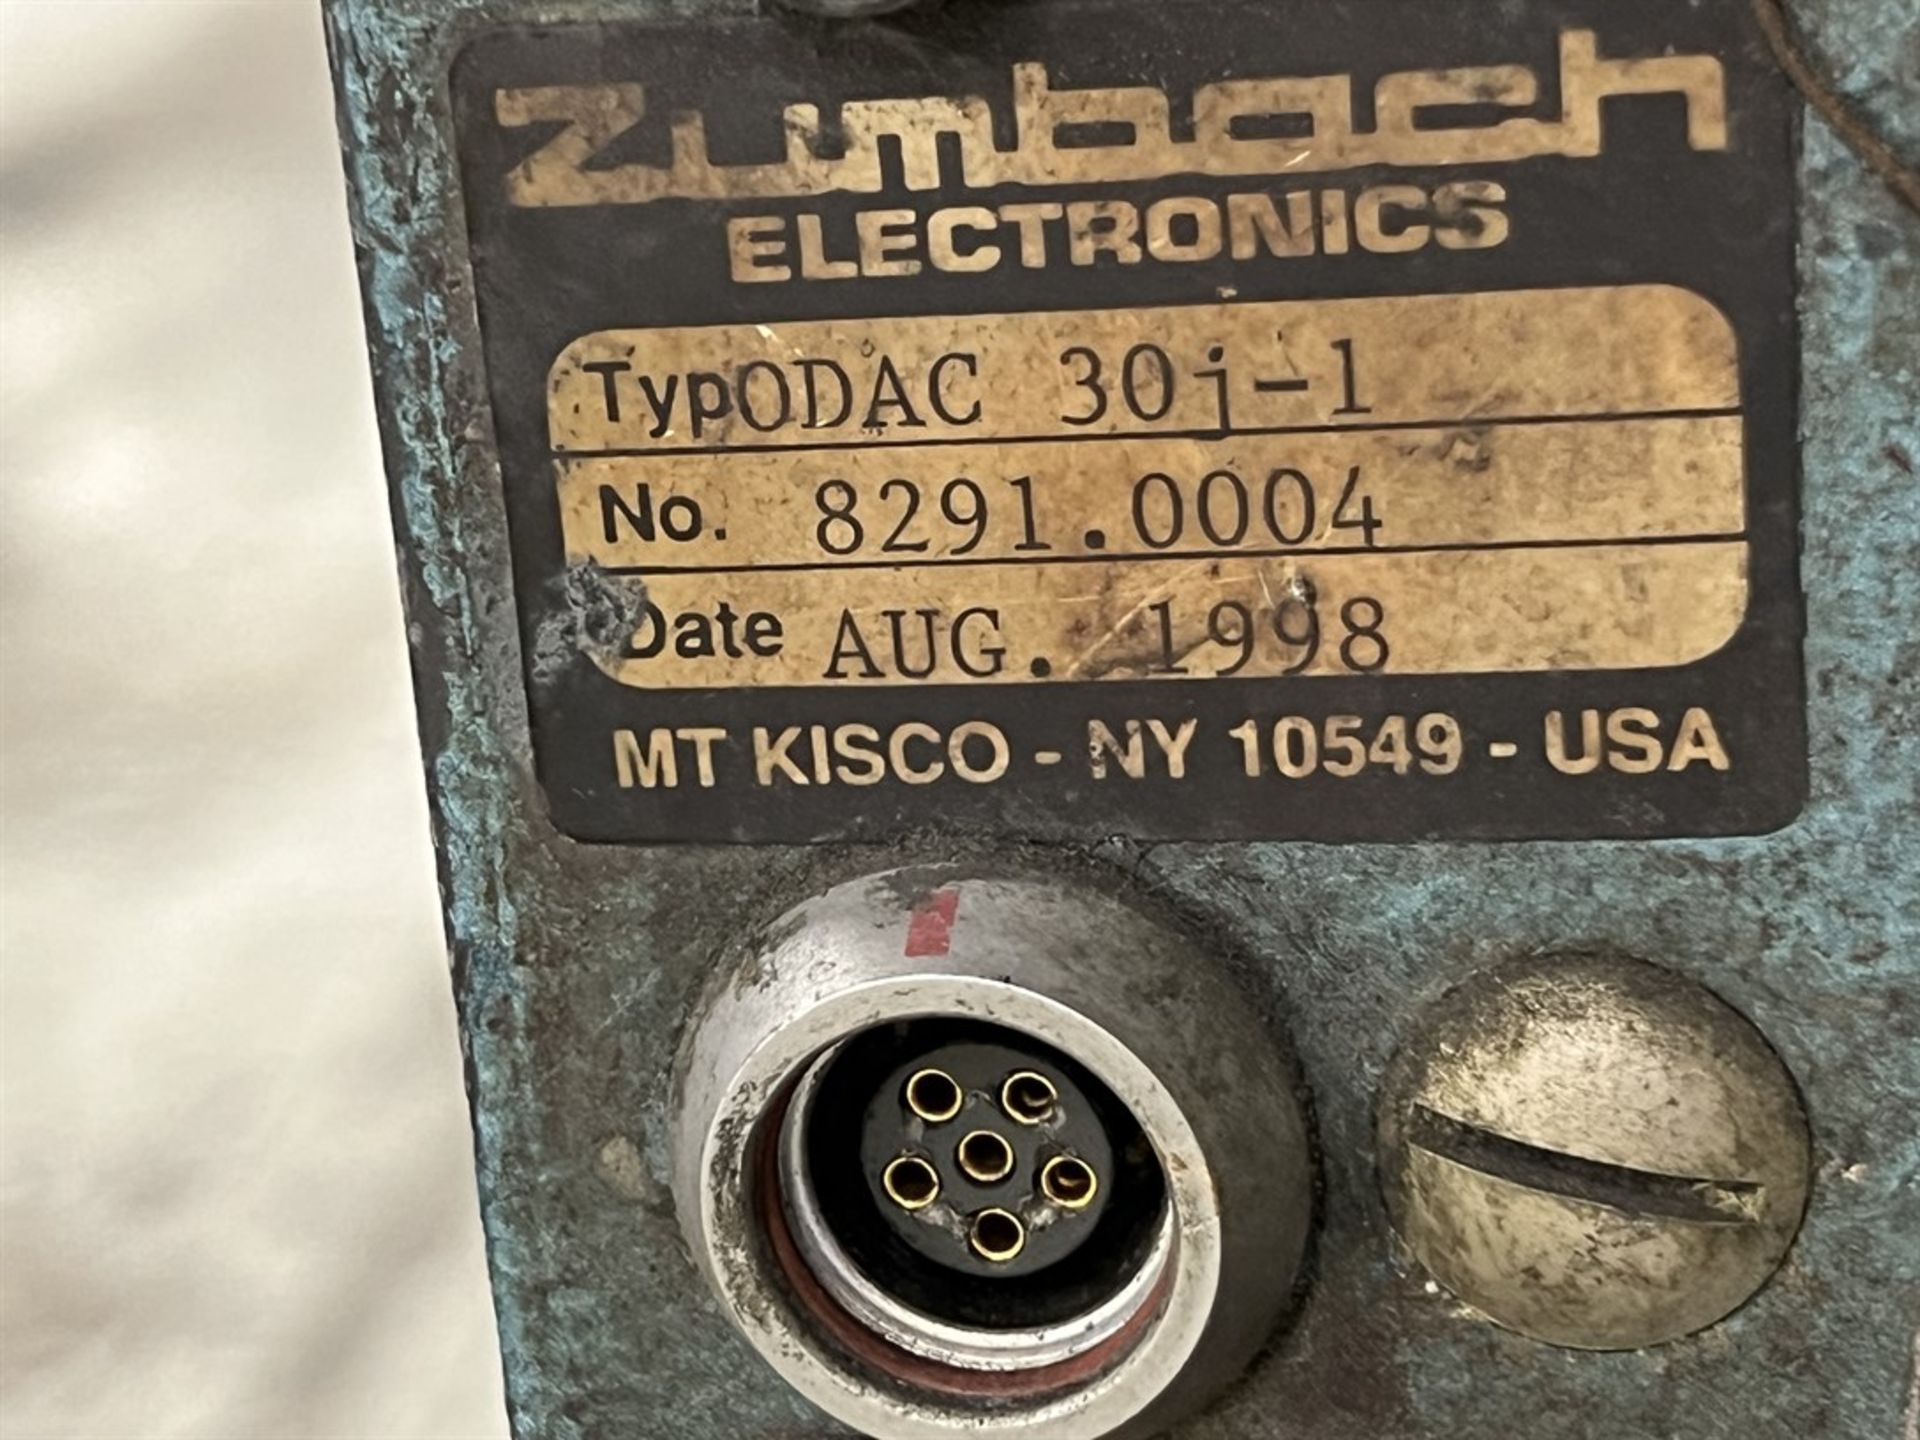 ZUMBACH ODAC 30J-1 Laser Micrometer, s/n 8291.0004 - Image 4 of 4